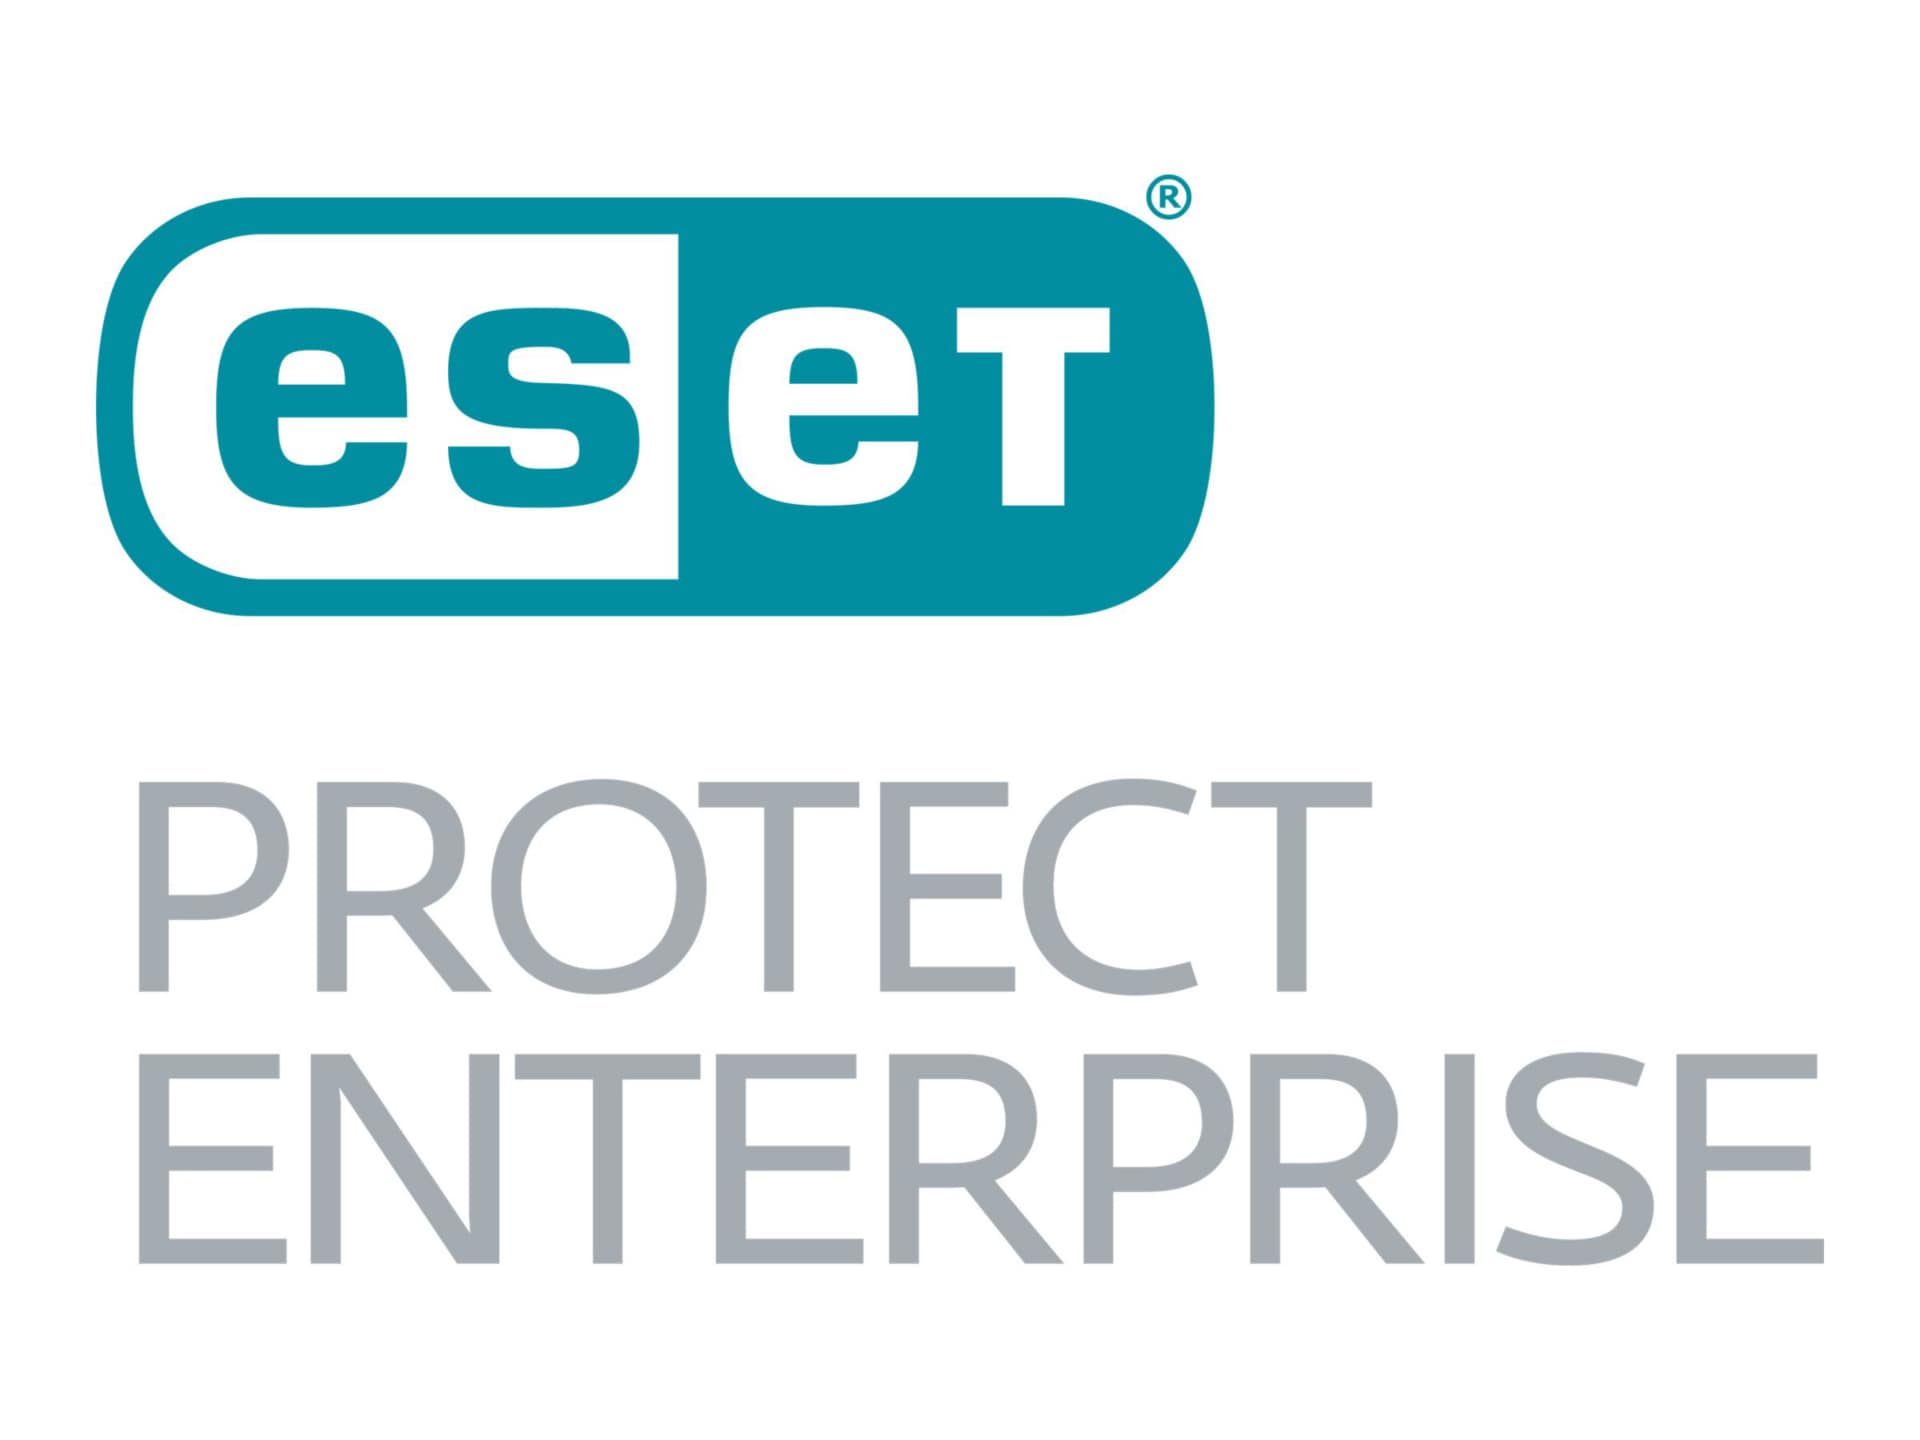 ESET PROTECT Entry - subscription license renewal (1 year) - 1 seat